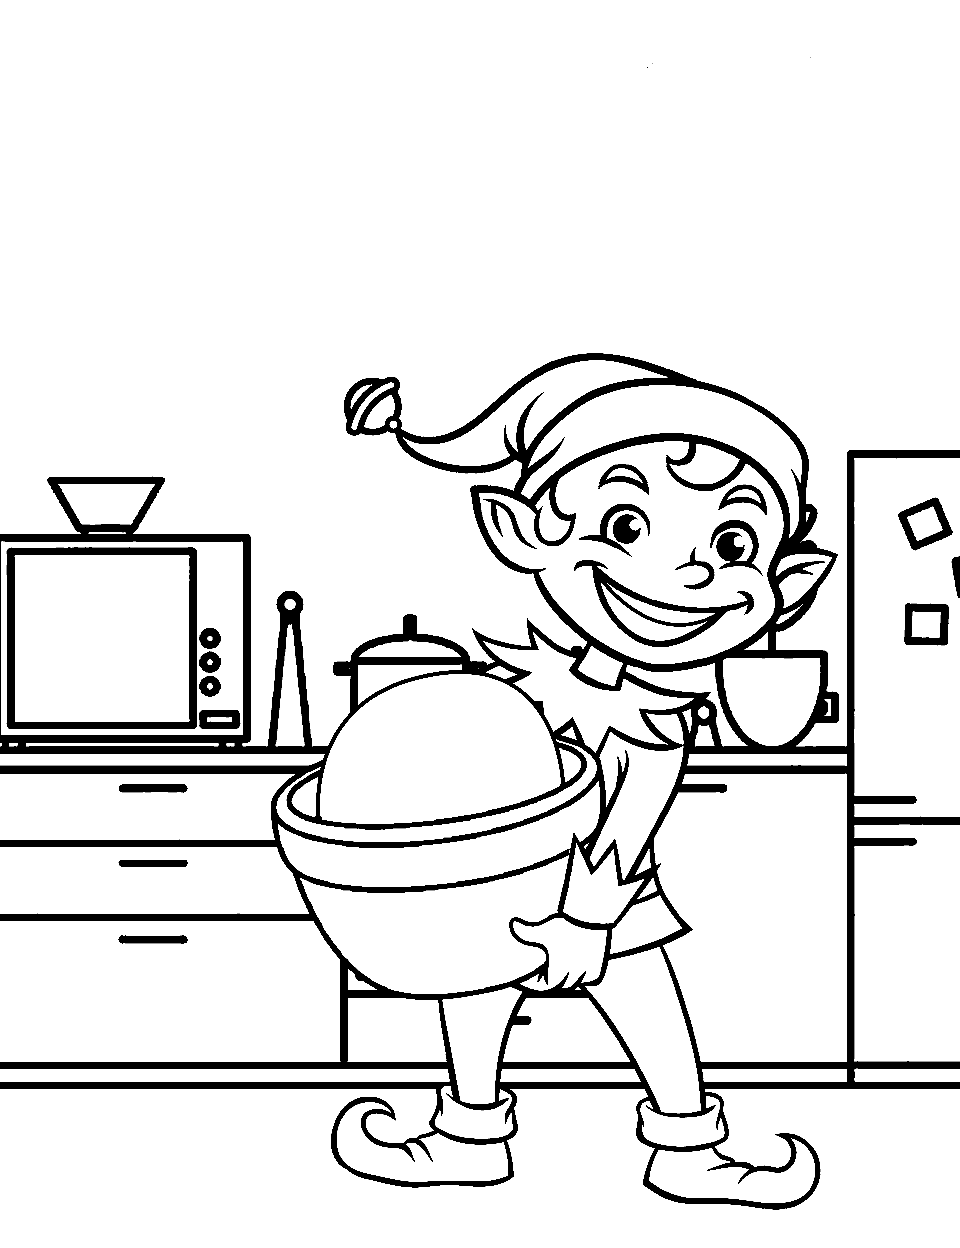 Elf Chef Cooking a Feast Coloring Page - An elf chef preparing a feast in a grand kitchen.